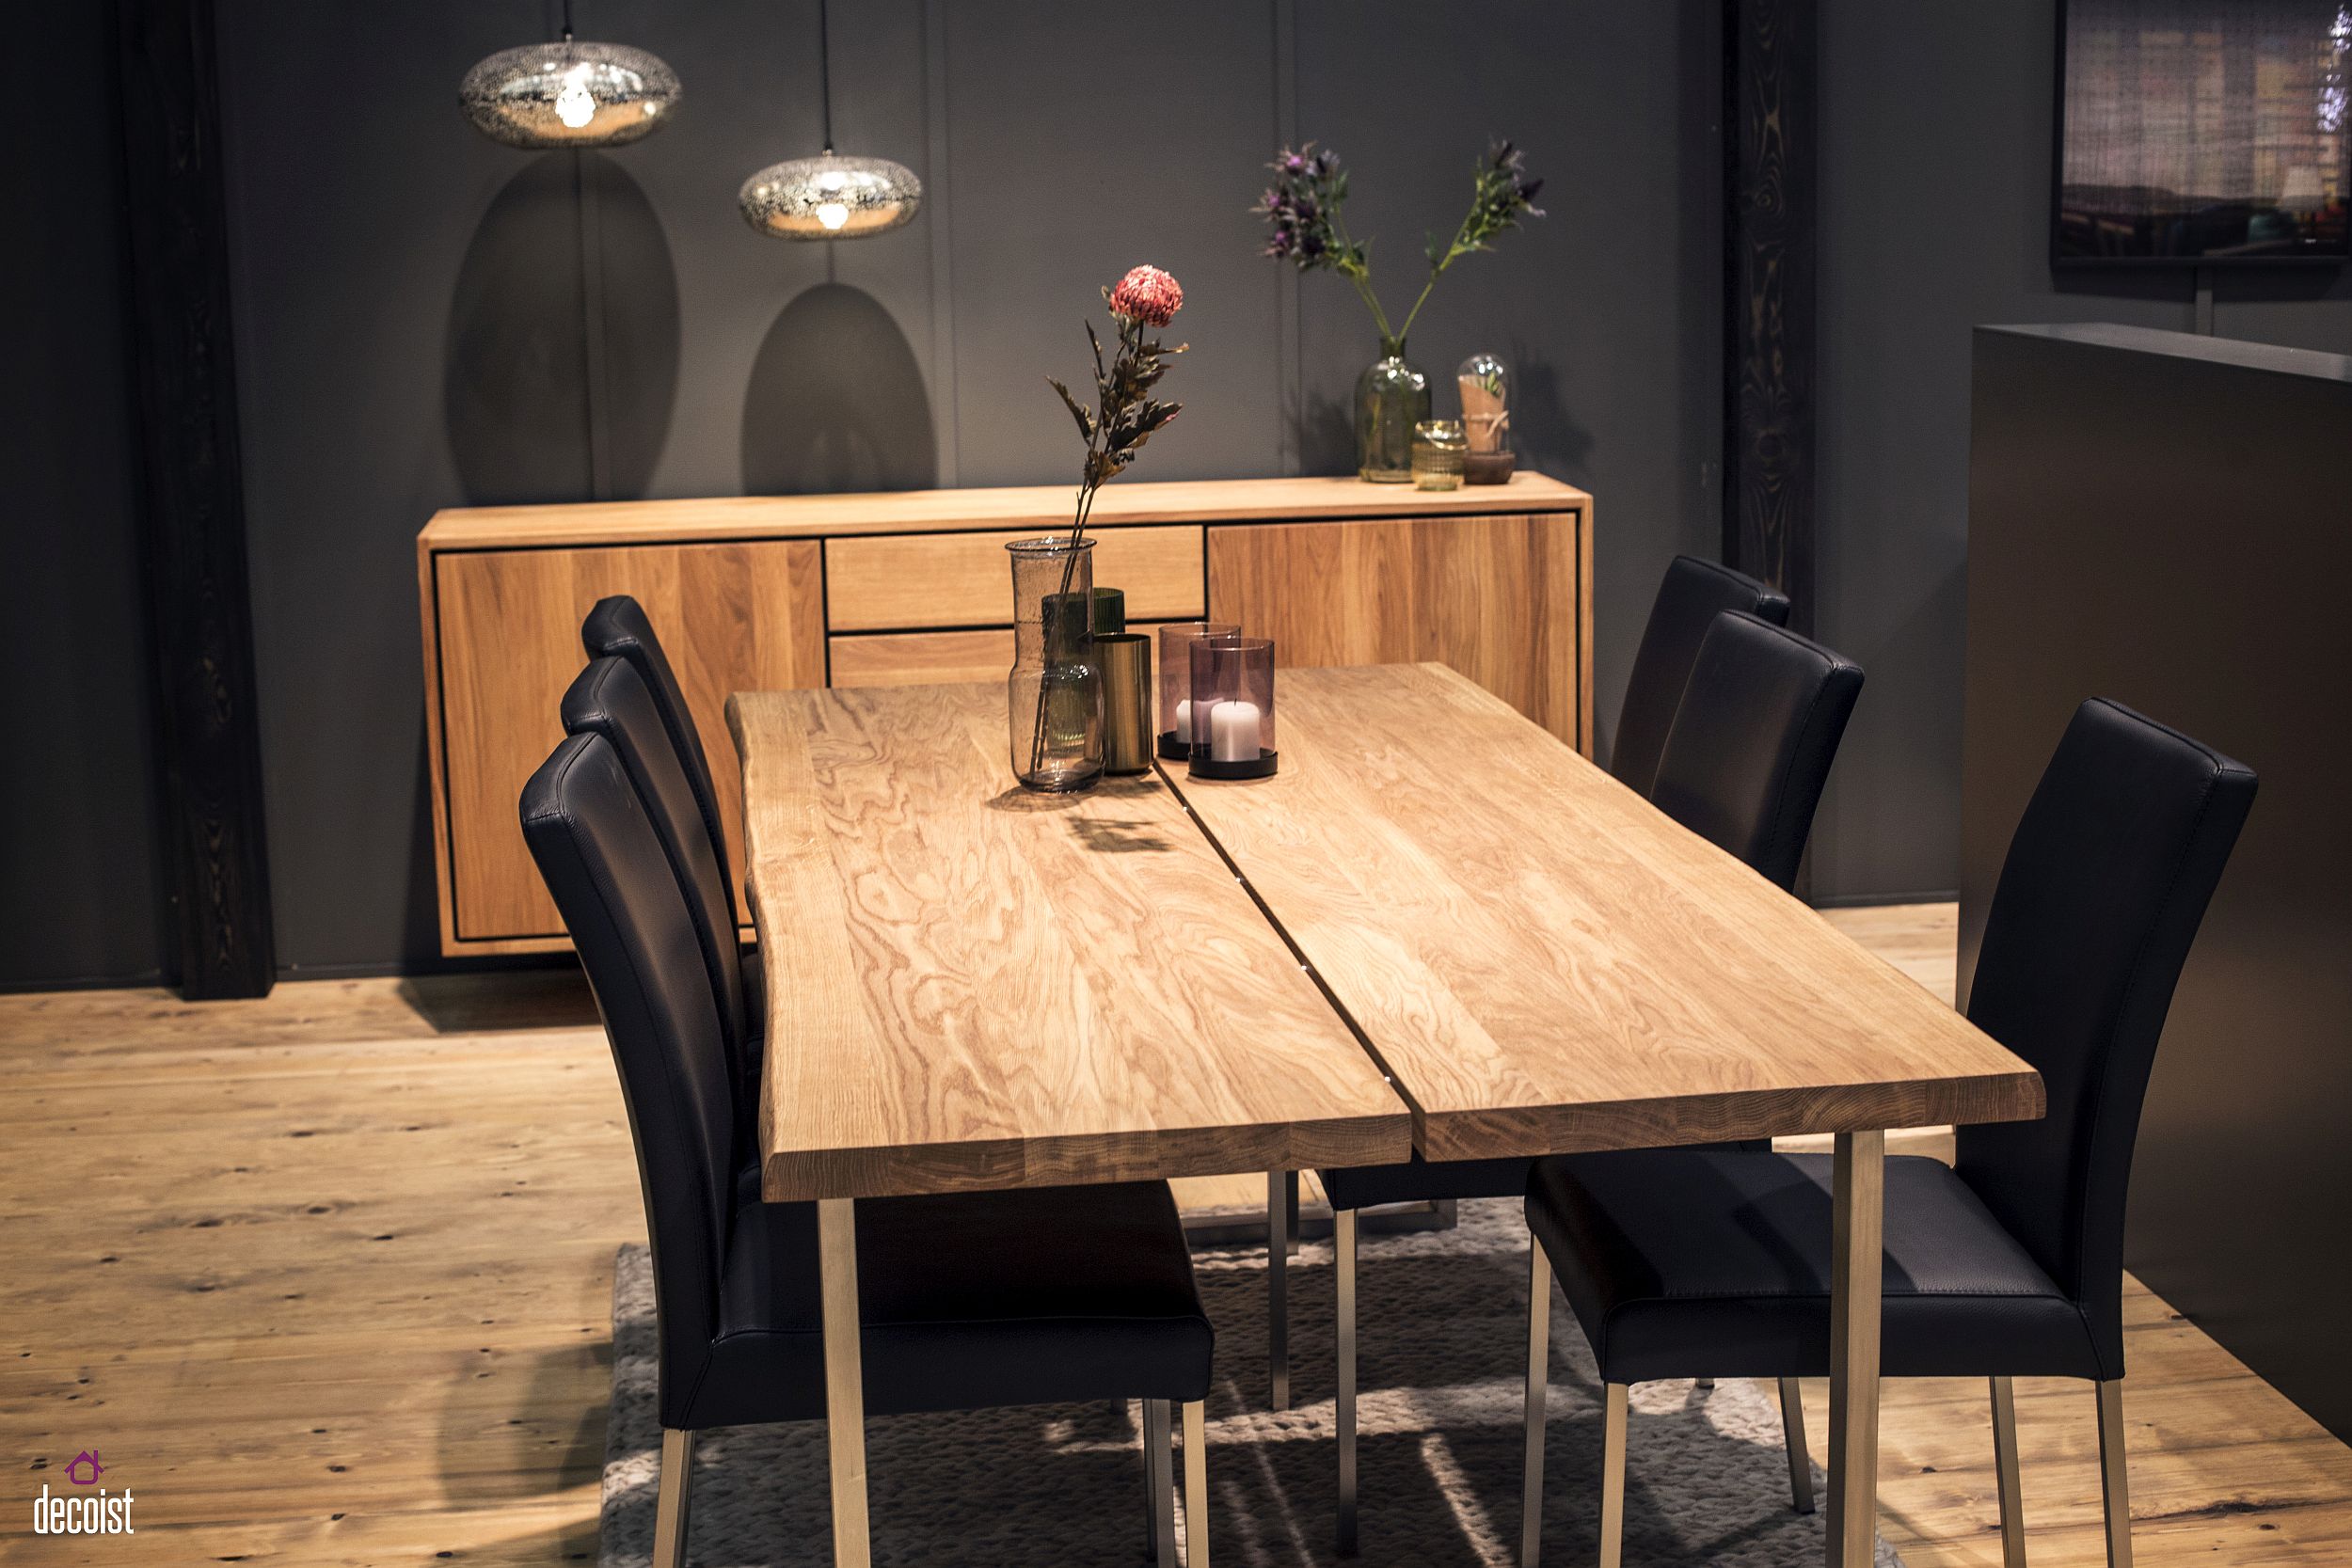 Live-edge wooden dining table with a hint of polished charm